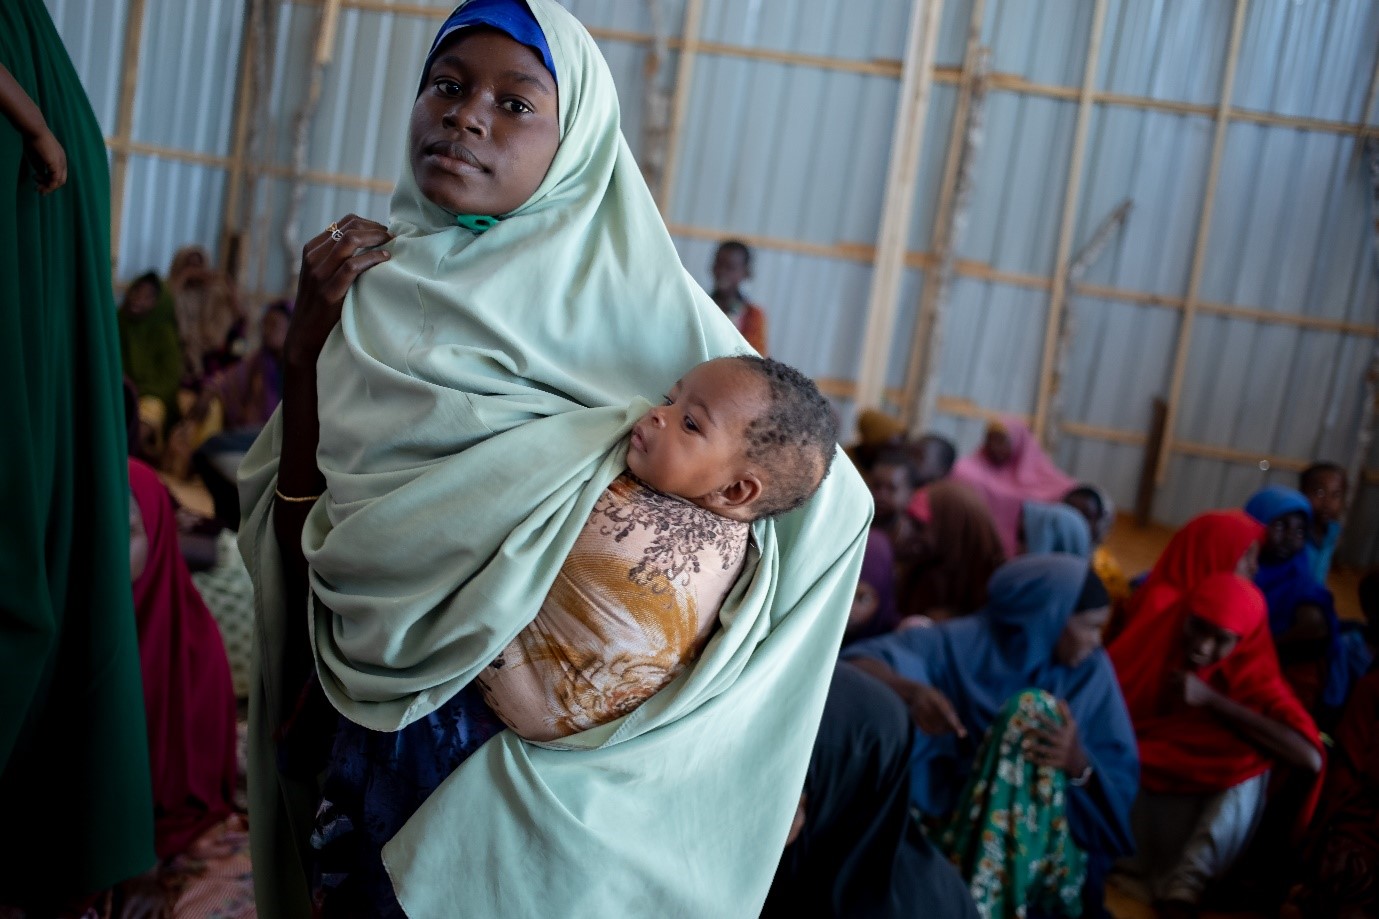 Somalia calls for help as 1.8 million Somali children under 5 experience acute malnutrition and health complications